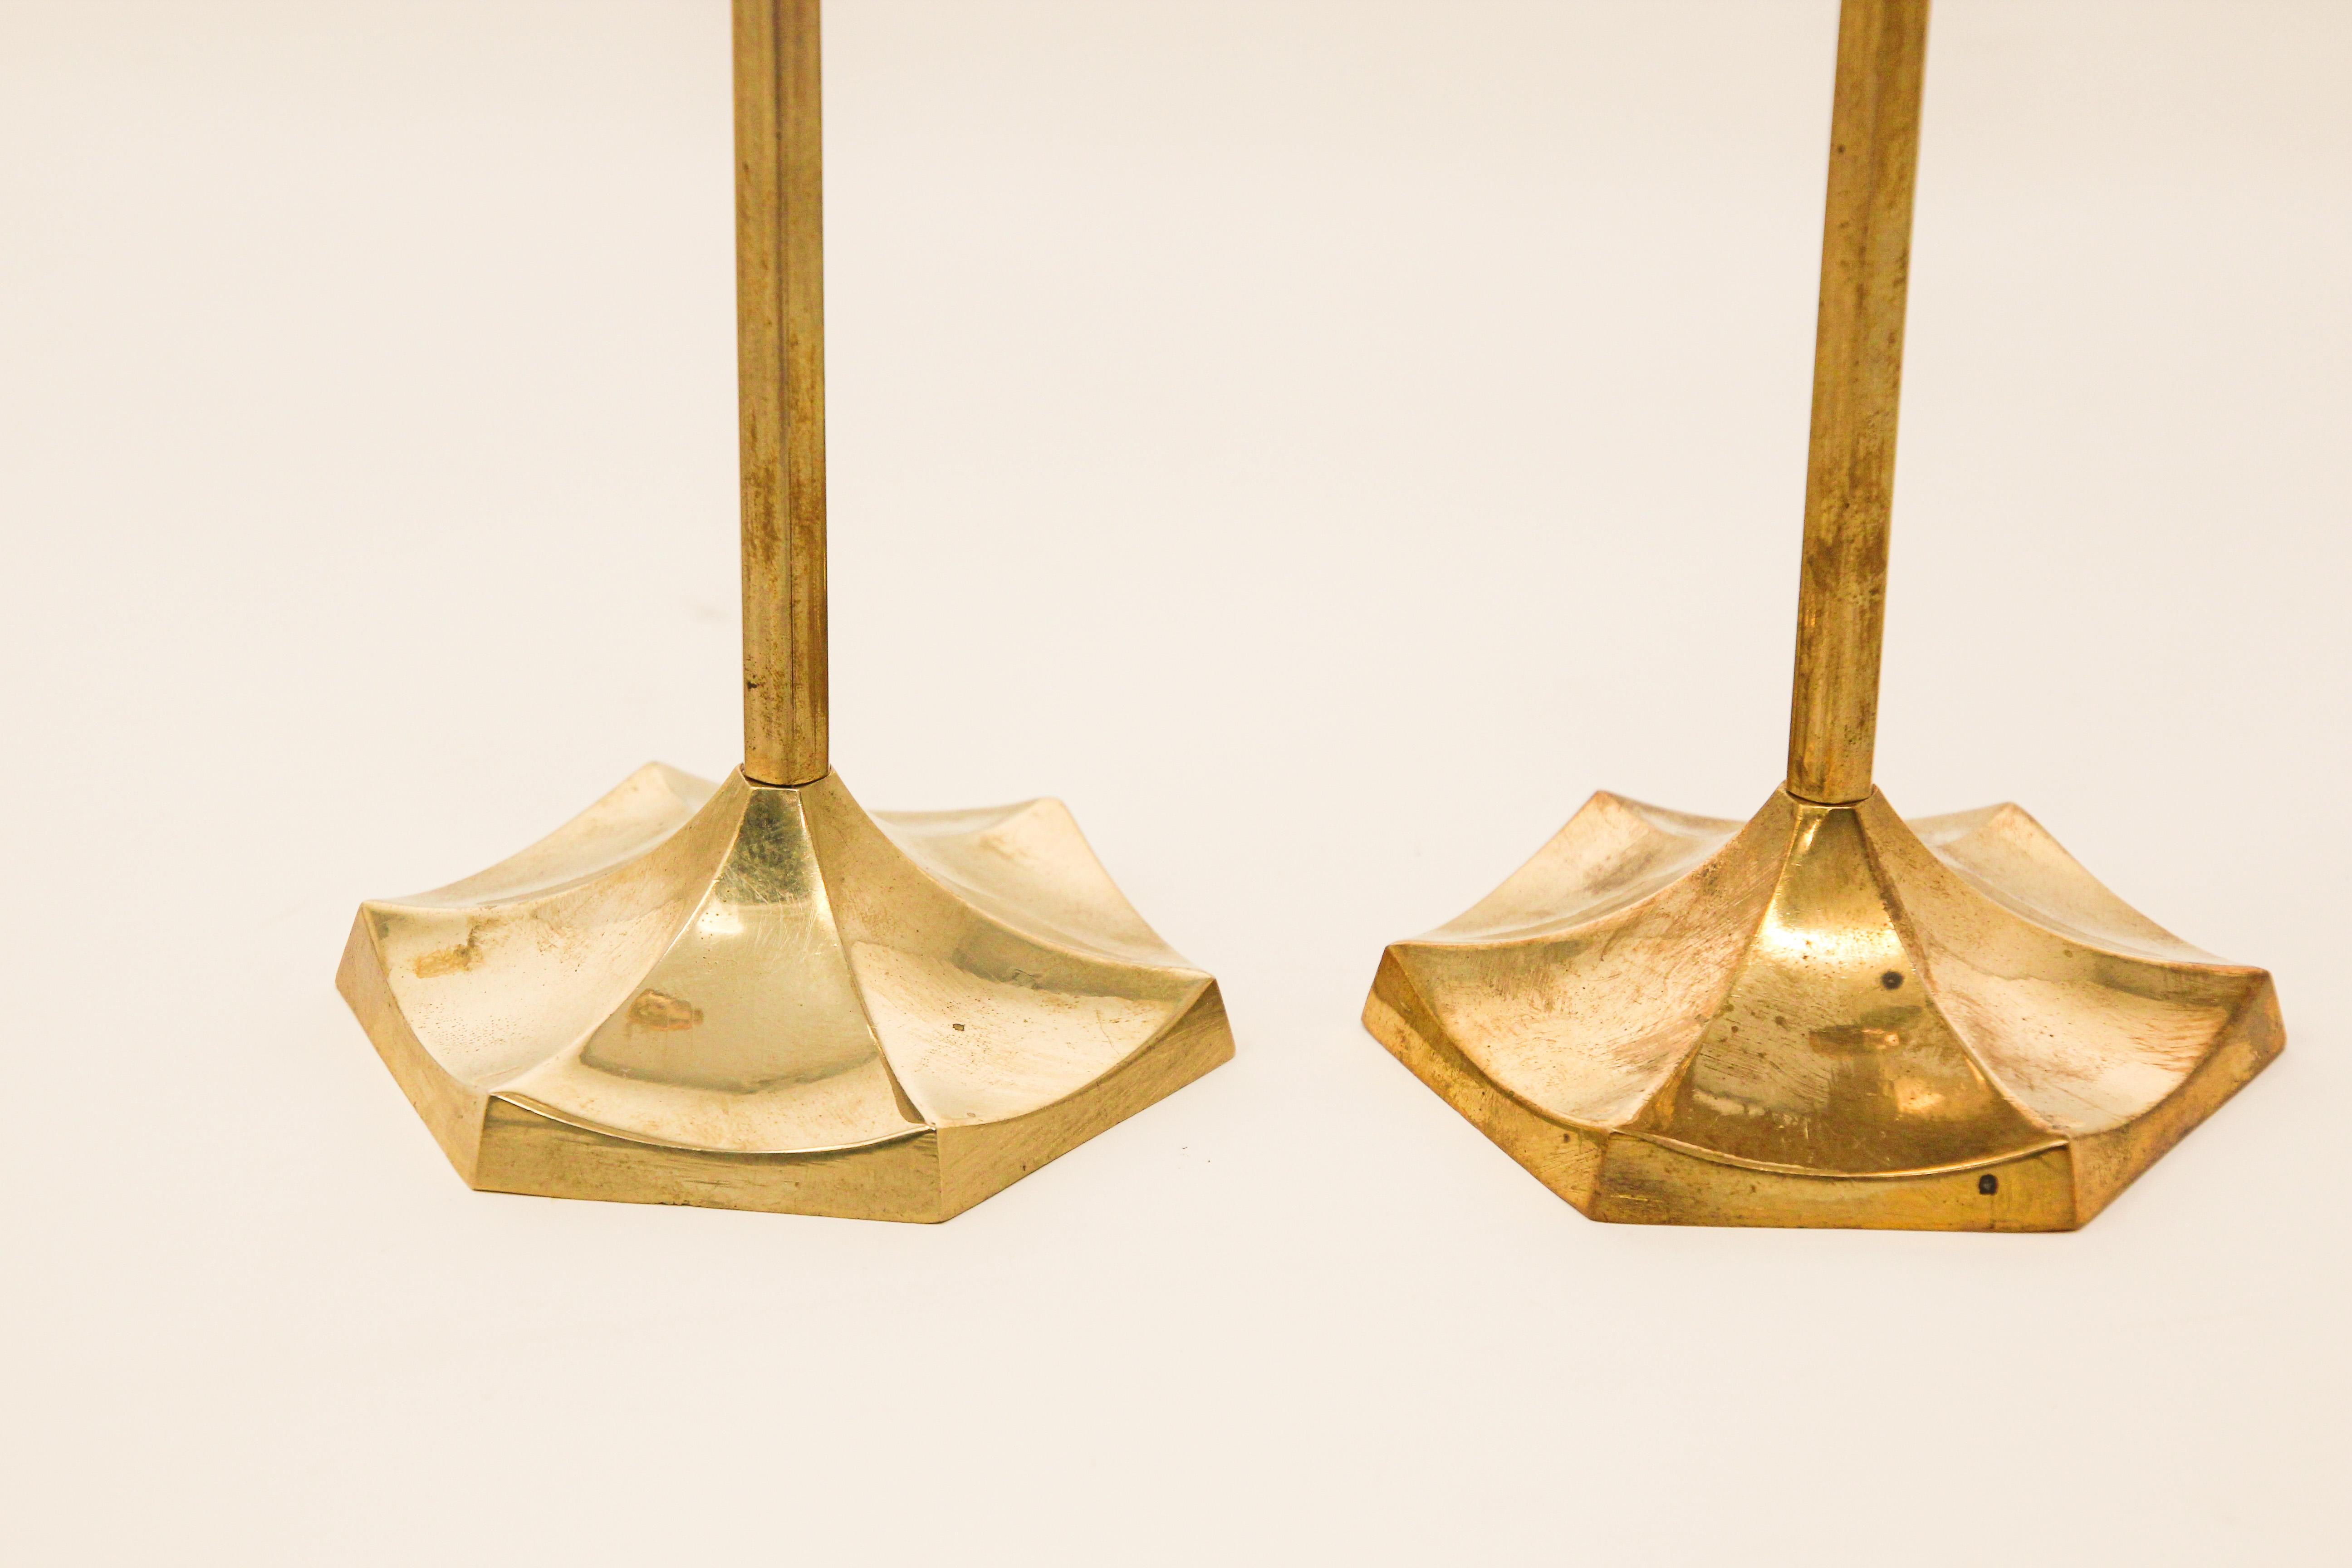 20th Century Pair of Polished Vintage Swedish Brass Candlesticks For Sale